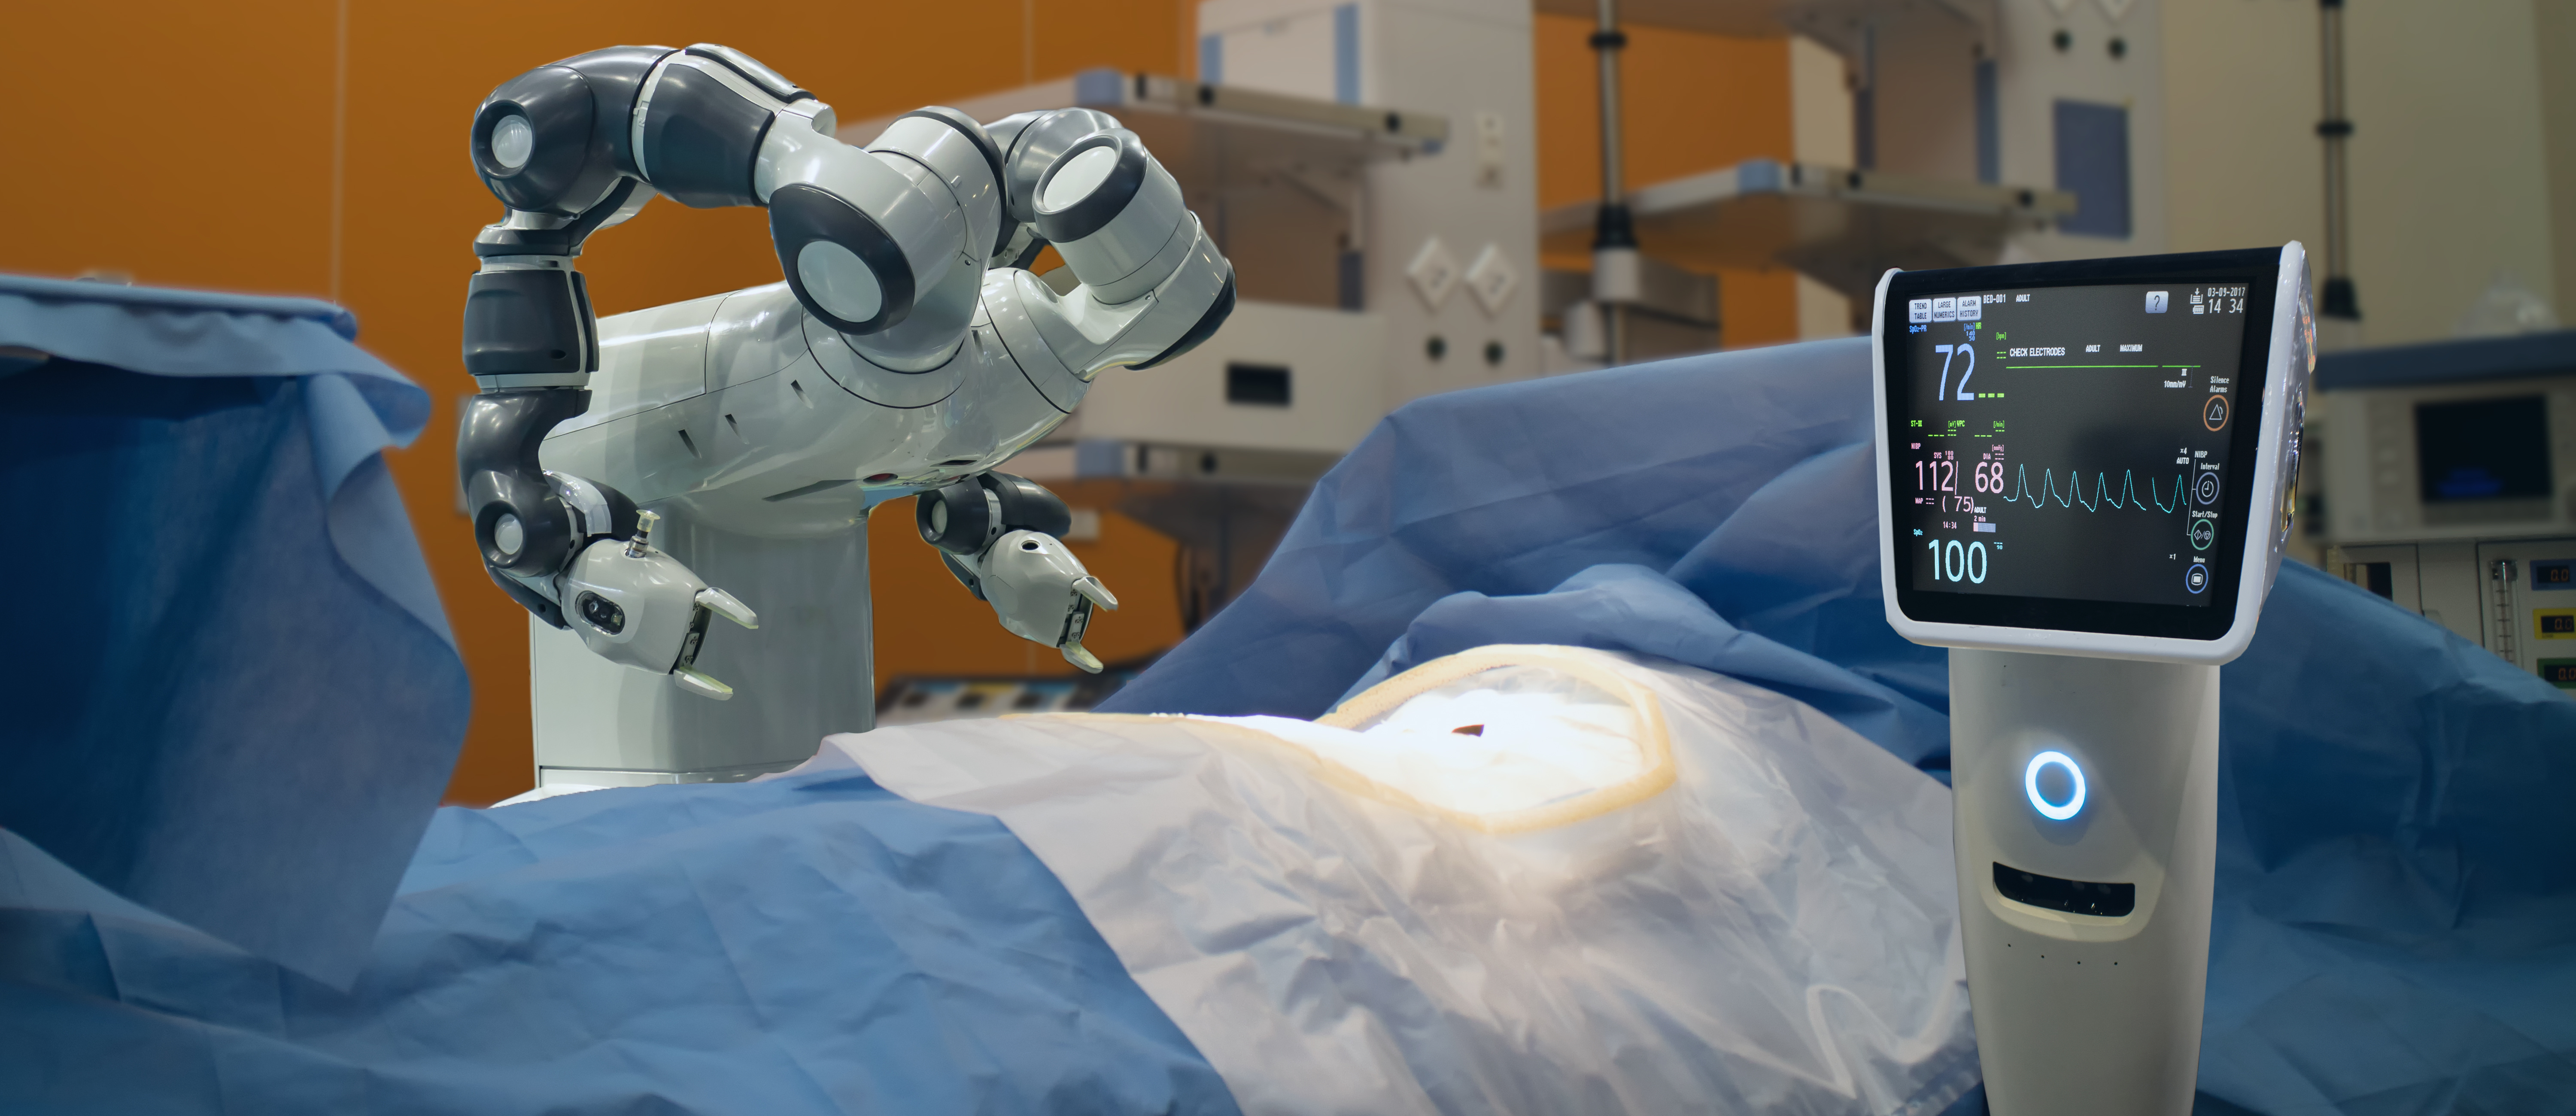 In surgical robot applications a motion solution that delivers high power density in a small package is a common requirement. (AdobeStock_232993142)